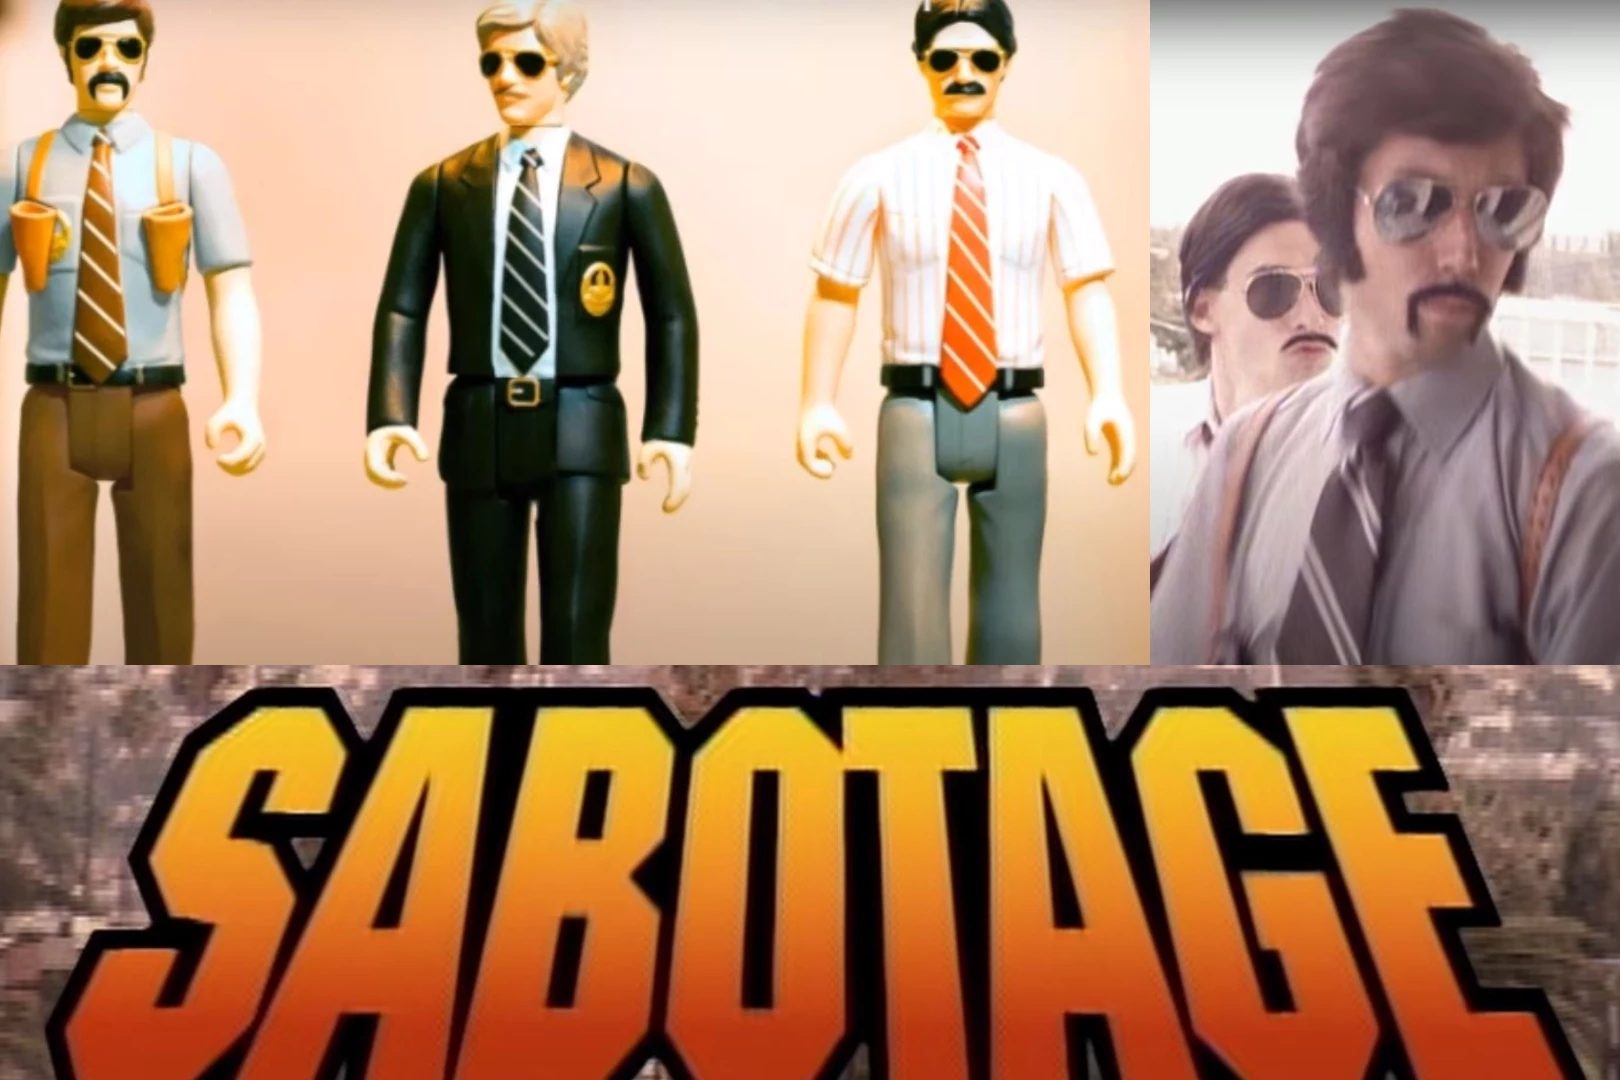 Check Out Beasties Boys Retro 'Sabotage' Action Figures